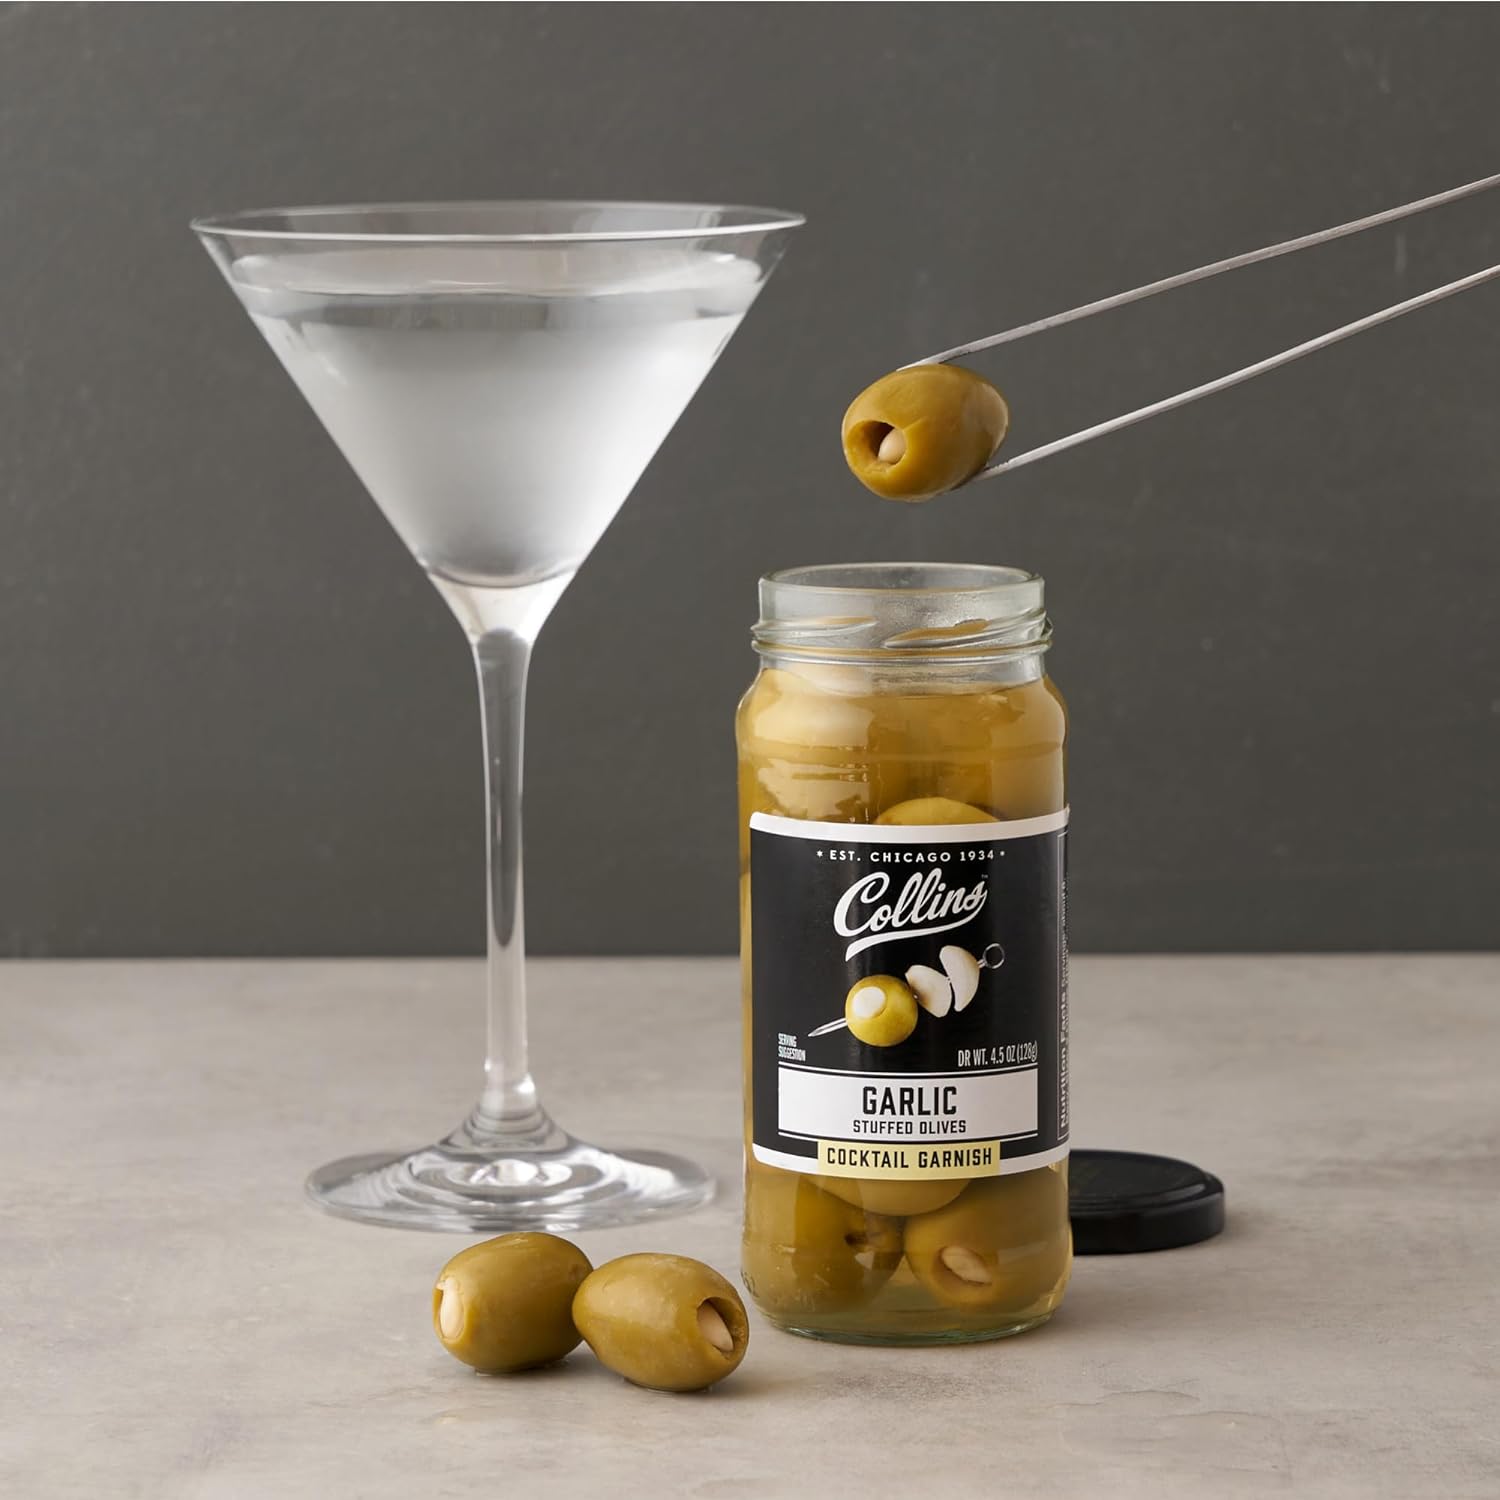 Collins Garlic Queen Olives | Premium Garlic-Stuffed Green Olives Garnish for Cocktails, Martinis, Salads, Charcuterie Trays, Cheese Boards, 5oz : Grocery & Gourmet Food